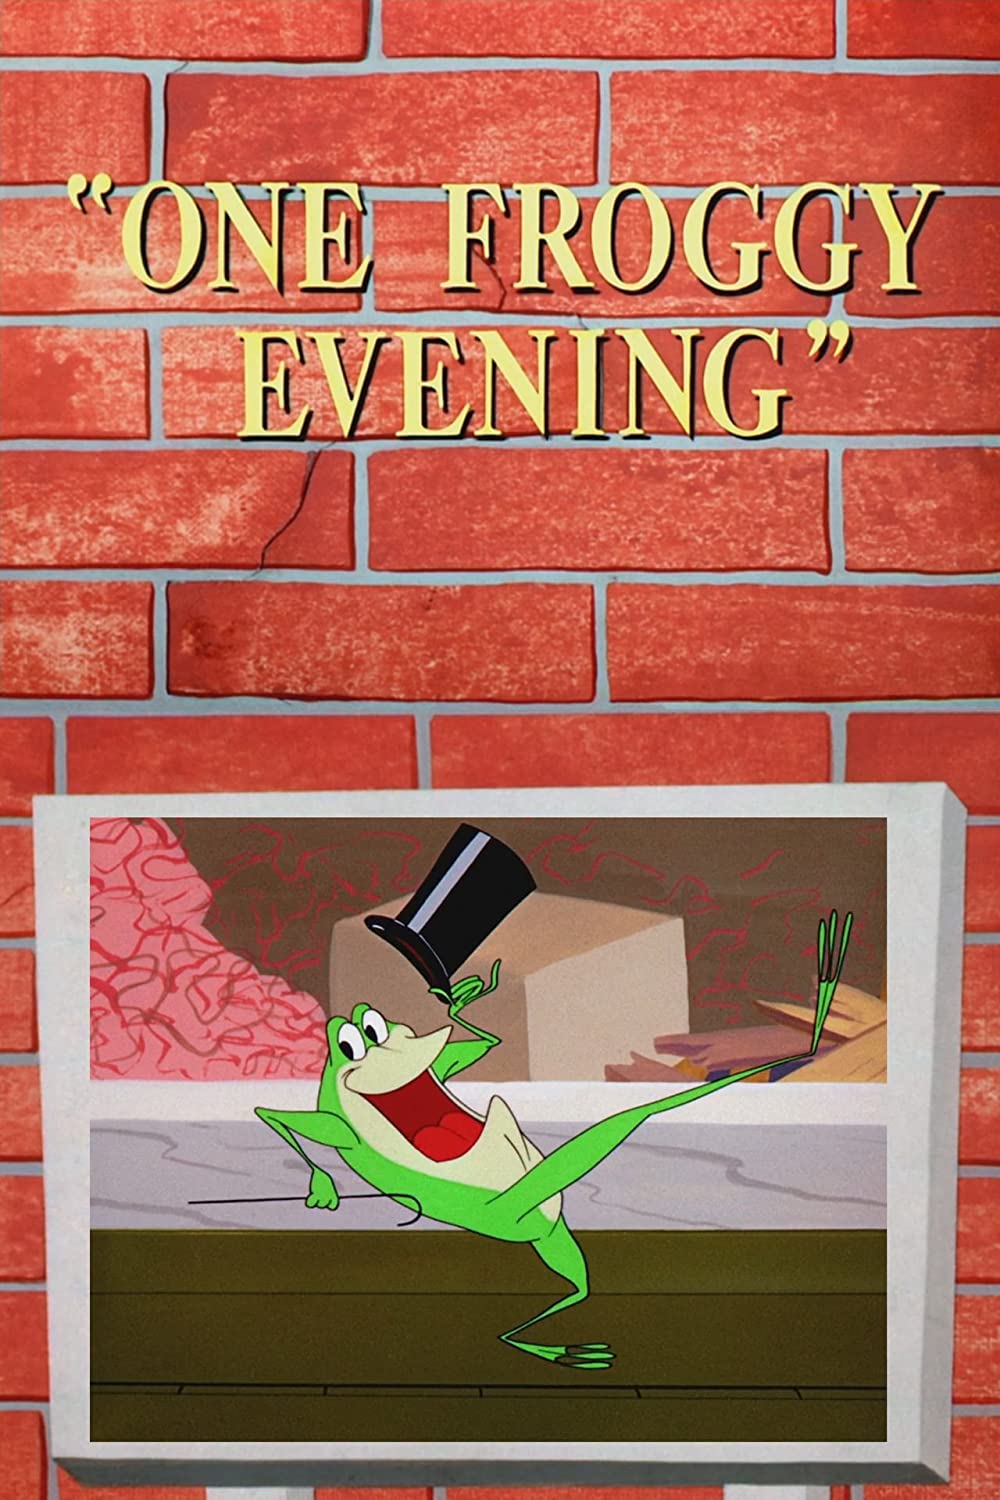 One Froggy Evening (Short 1955)